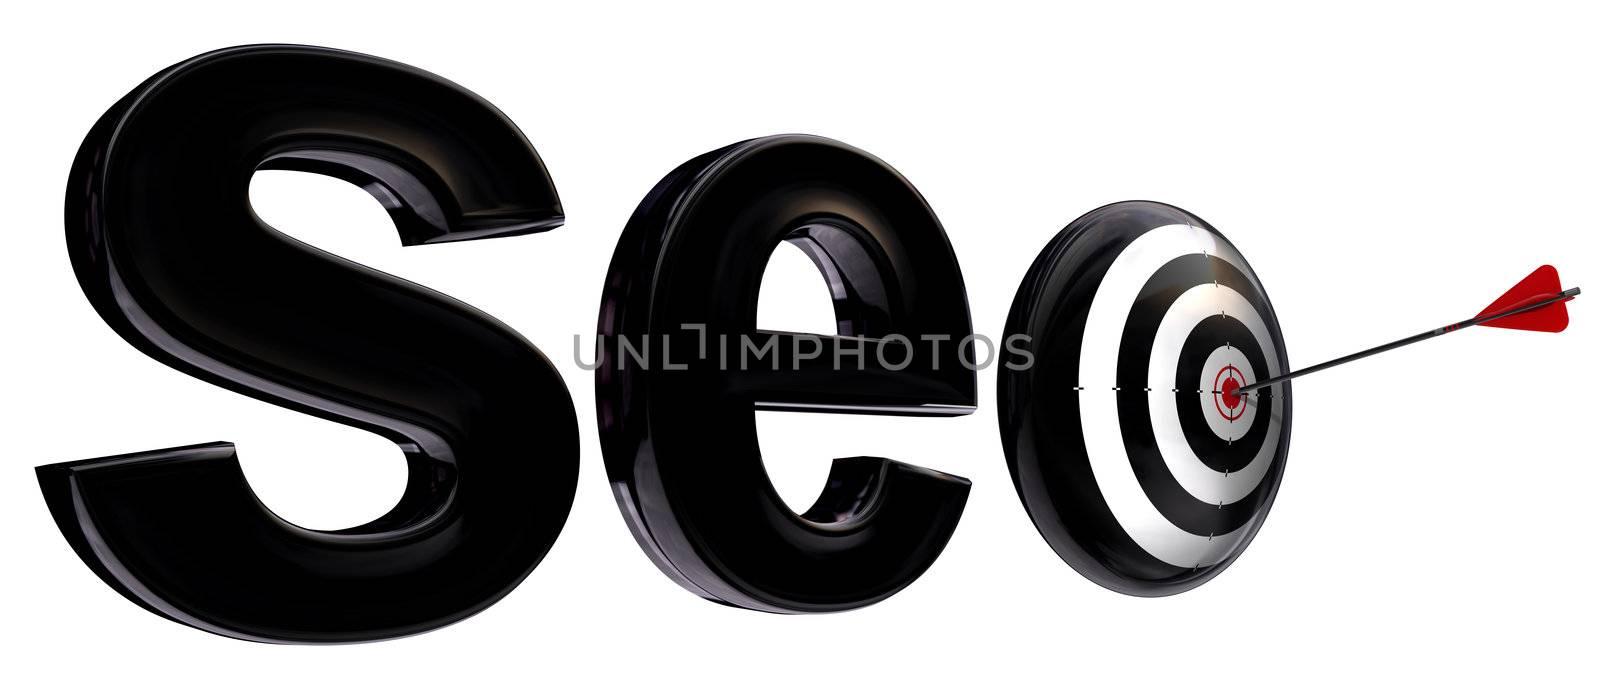 seo 3d word and target  by donskarpo